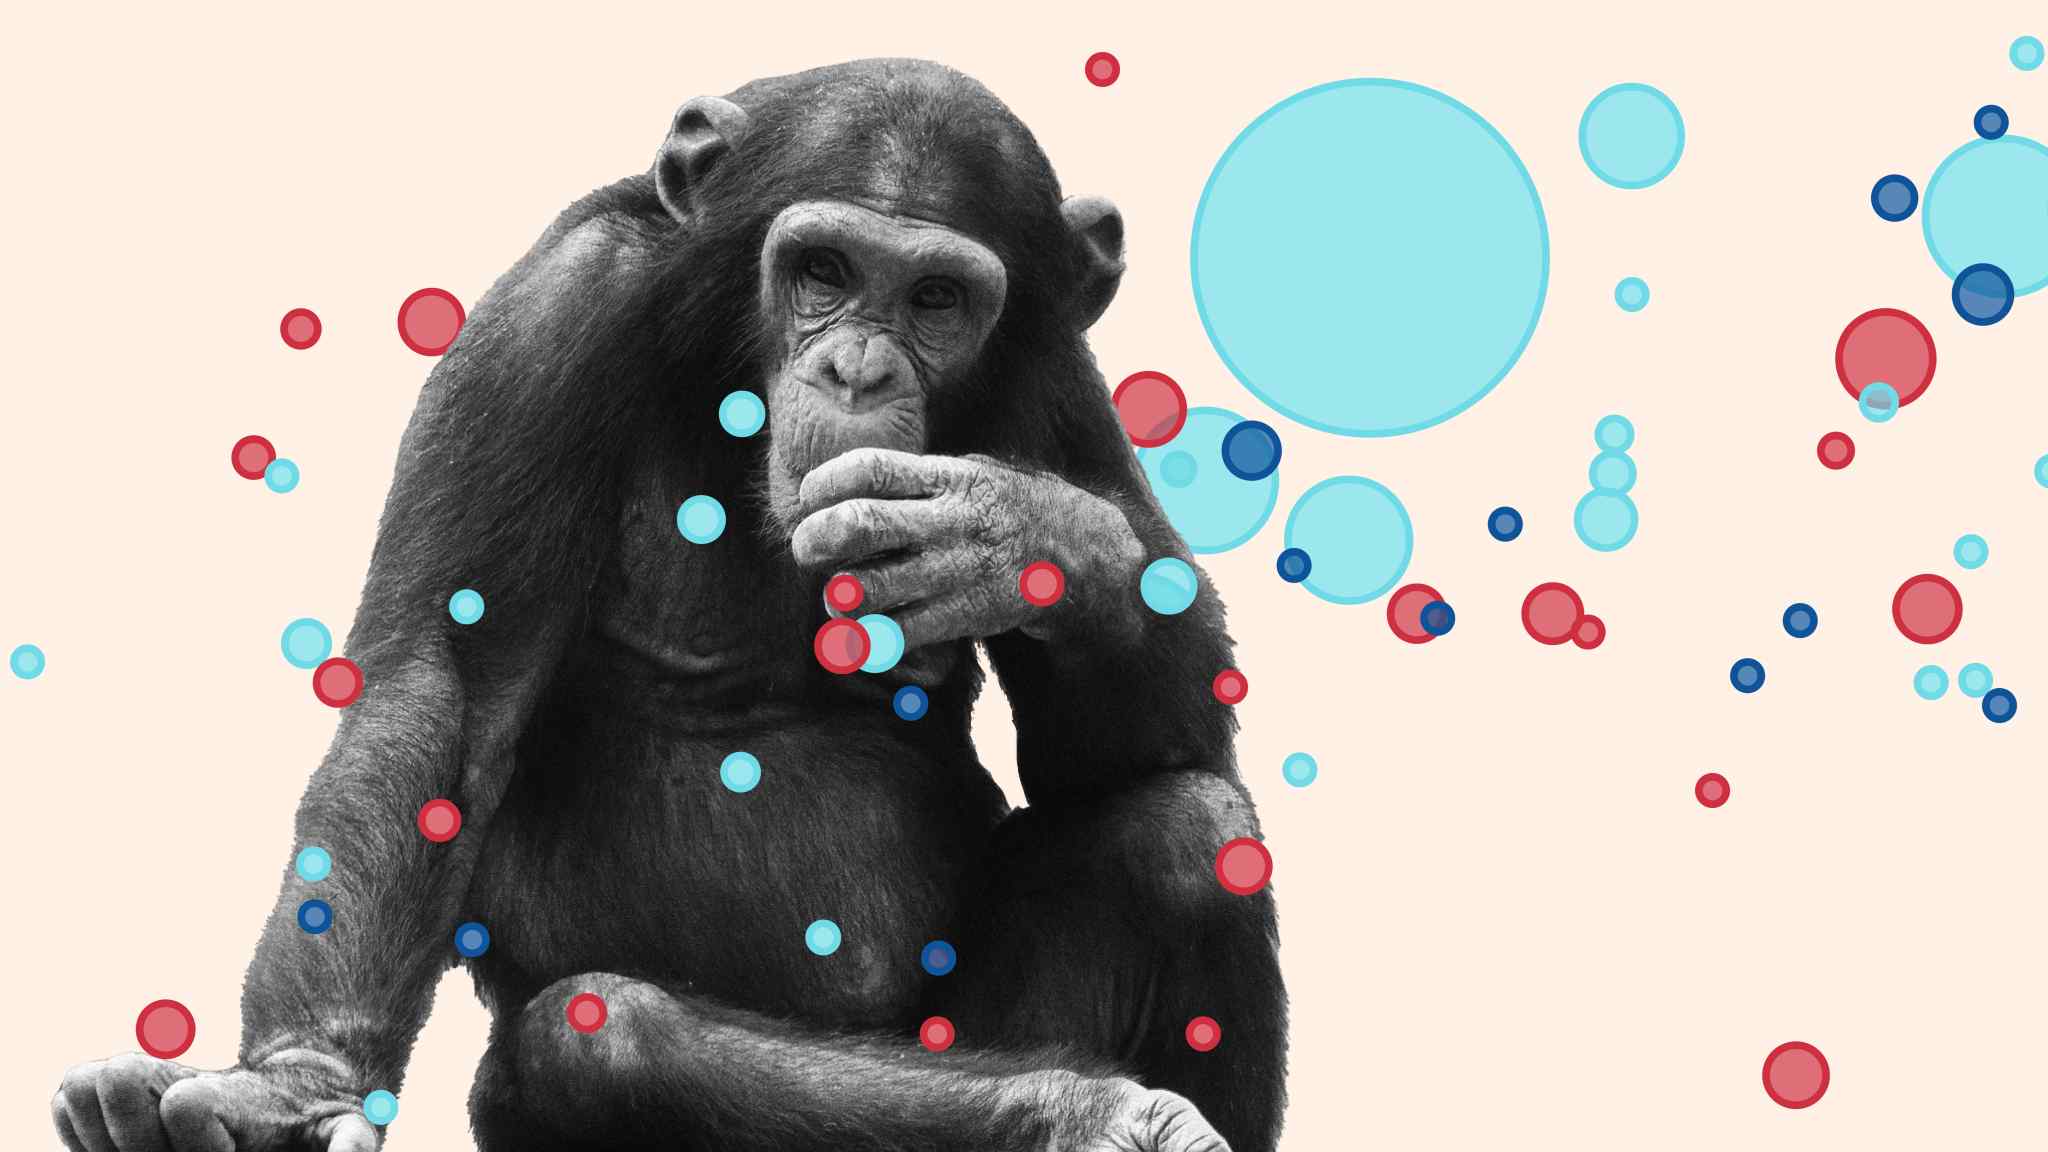 What chimpanzees tell us about how humans see data